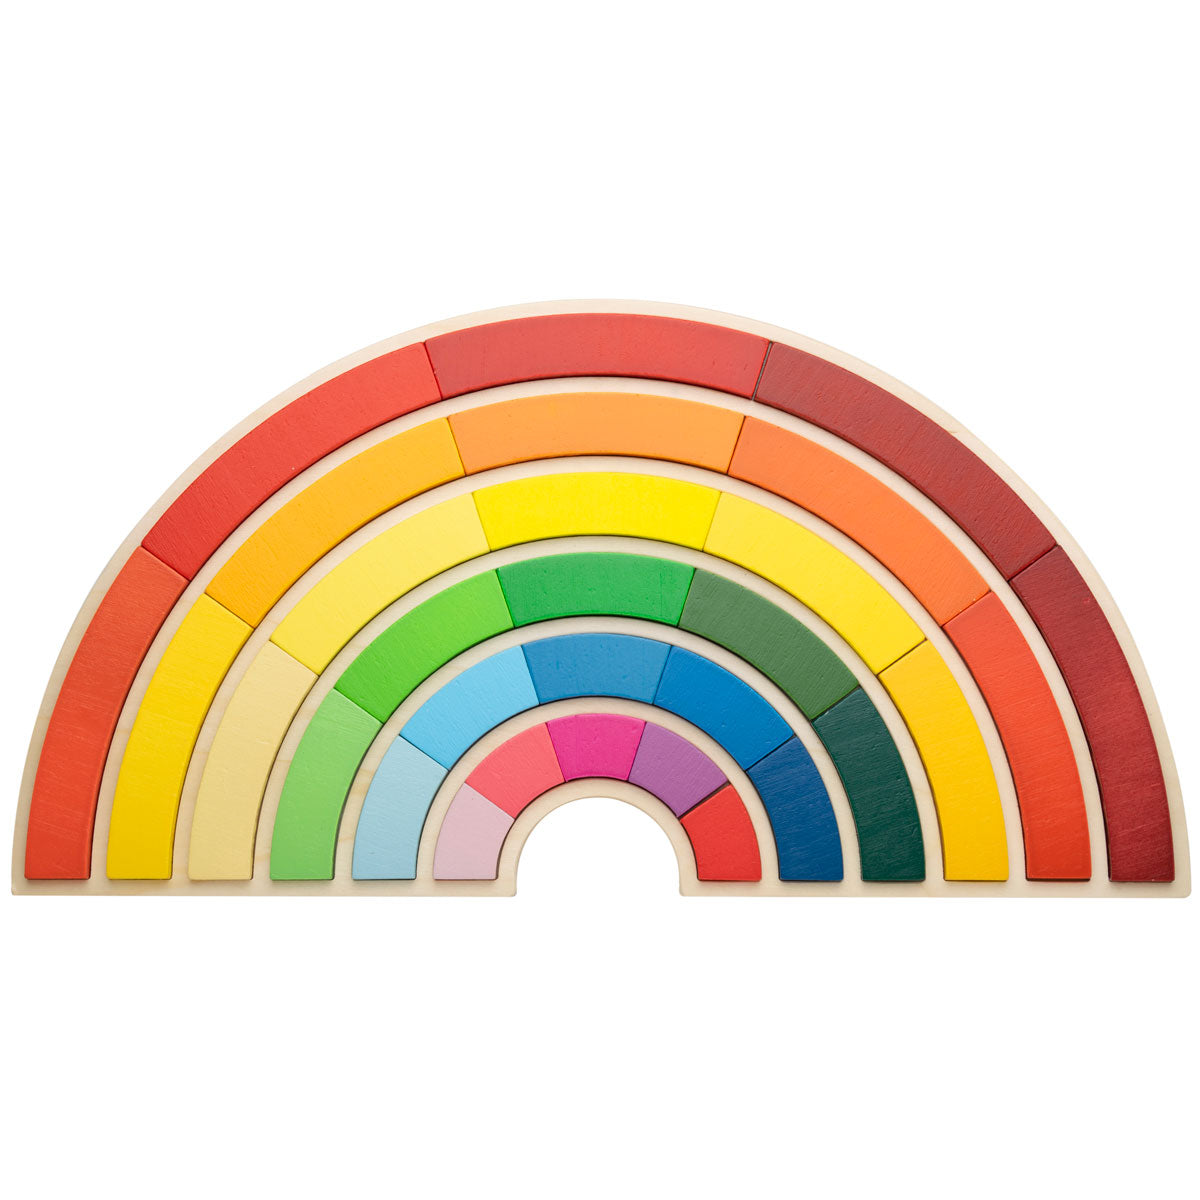 Building Rainbows, Introducing our unique and open-ended rainbow puzzle! This puzzle is unlike any other as it allows your child to choose where the puzzle pieces go. With 30 vibrantly coloured pieces and a puzzle board, your child can design their very own rainbow using various dazzling colours. Not only can they create a rainbow, but they can also mix and match the pieces to form shapes and patterns off the puzzle board. Our rainbow puzzle is not only fun but also educational. It teaches colour recognitio